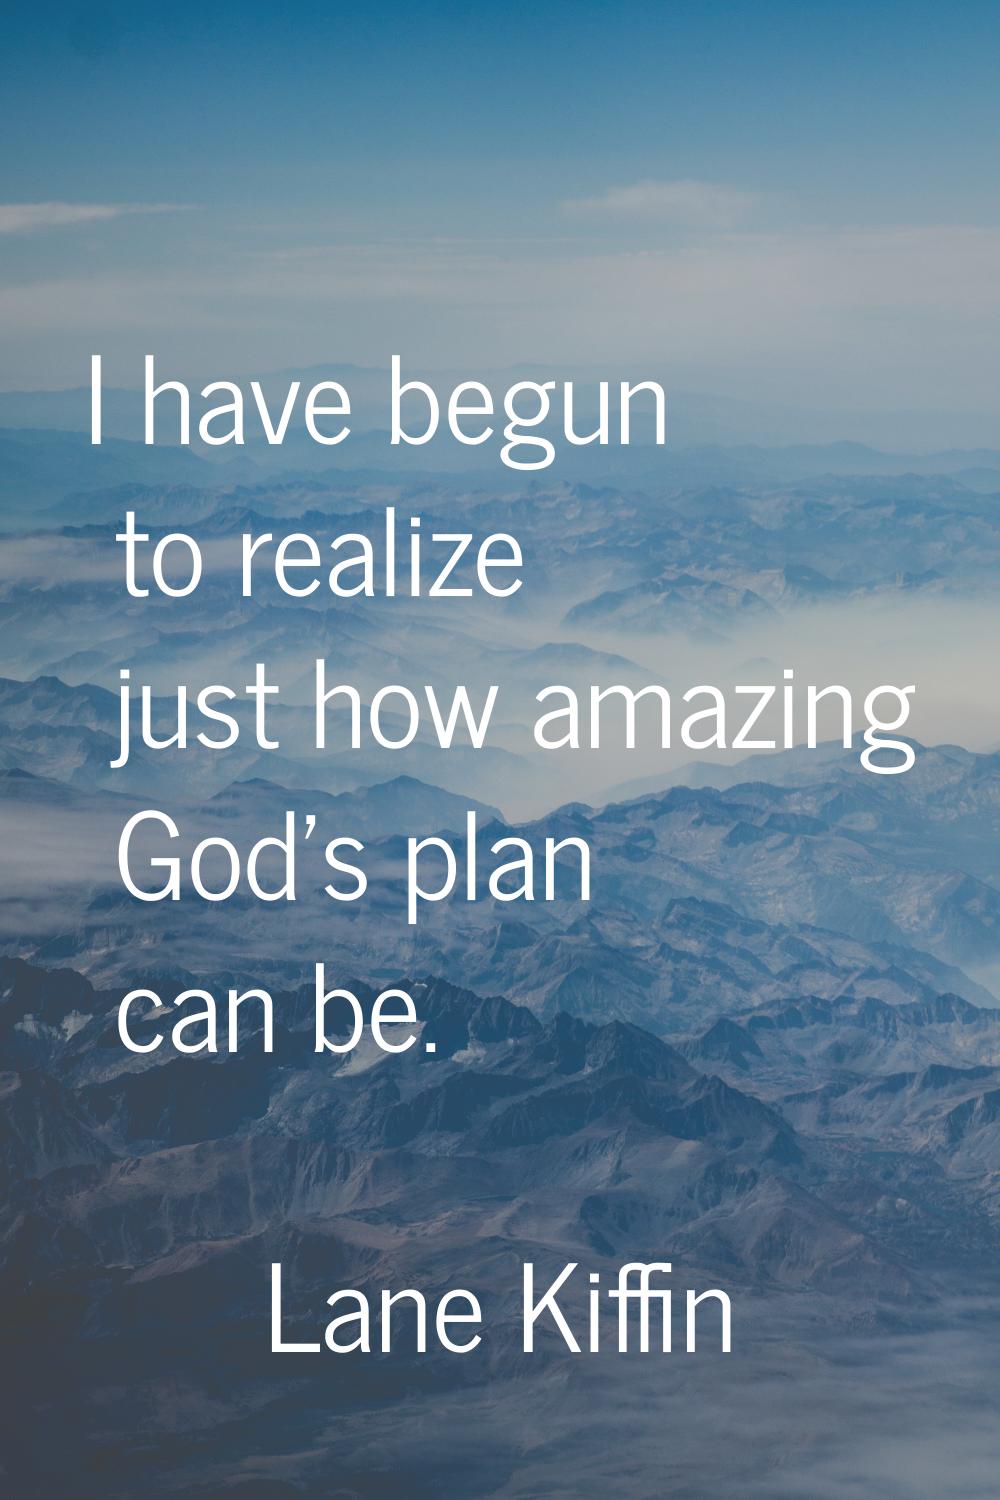 I have begun to realize just how amazing God's plan can be.